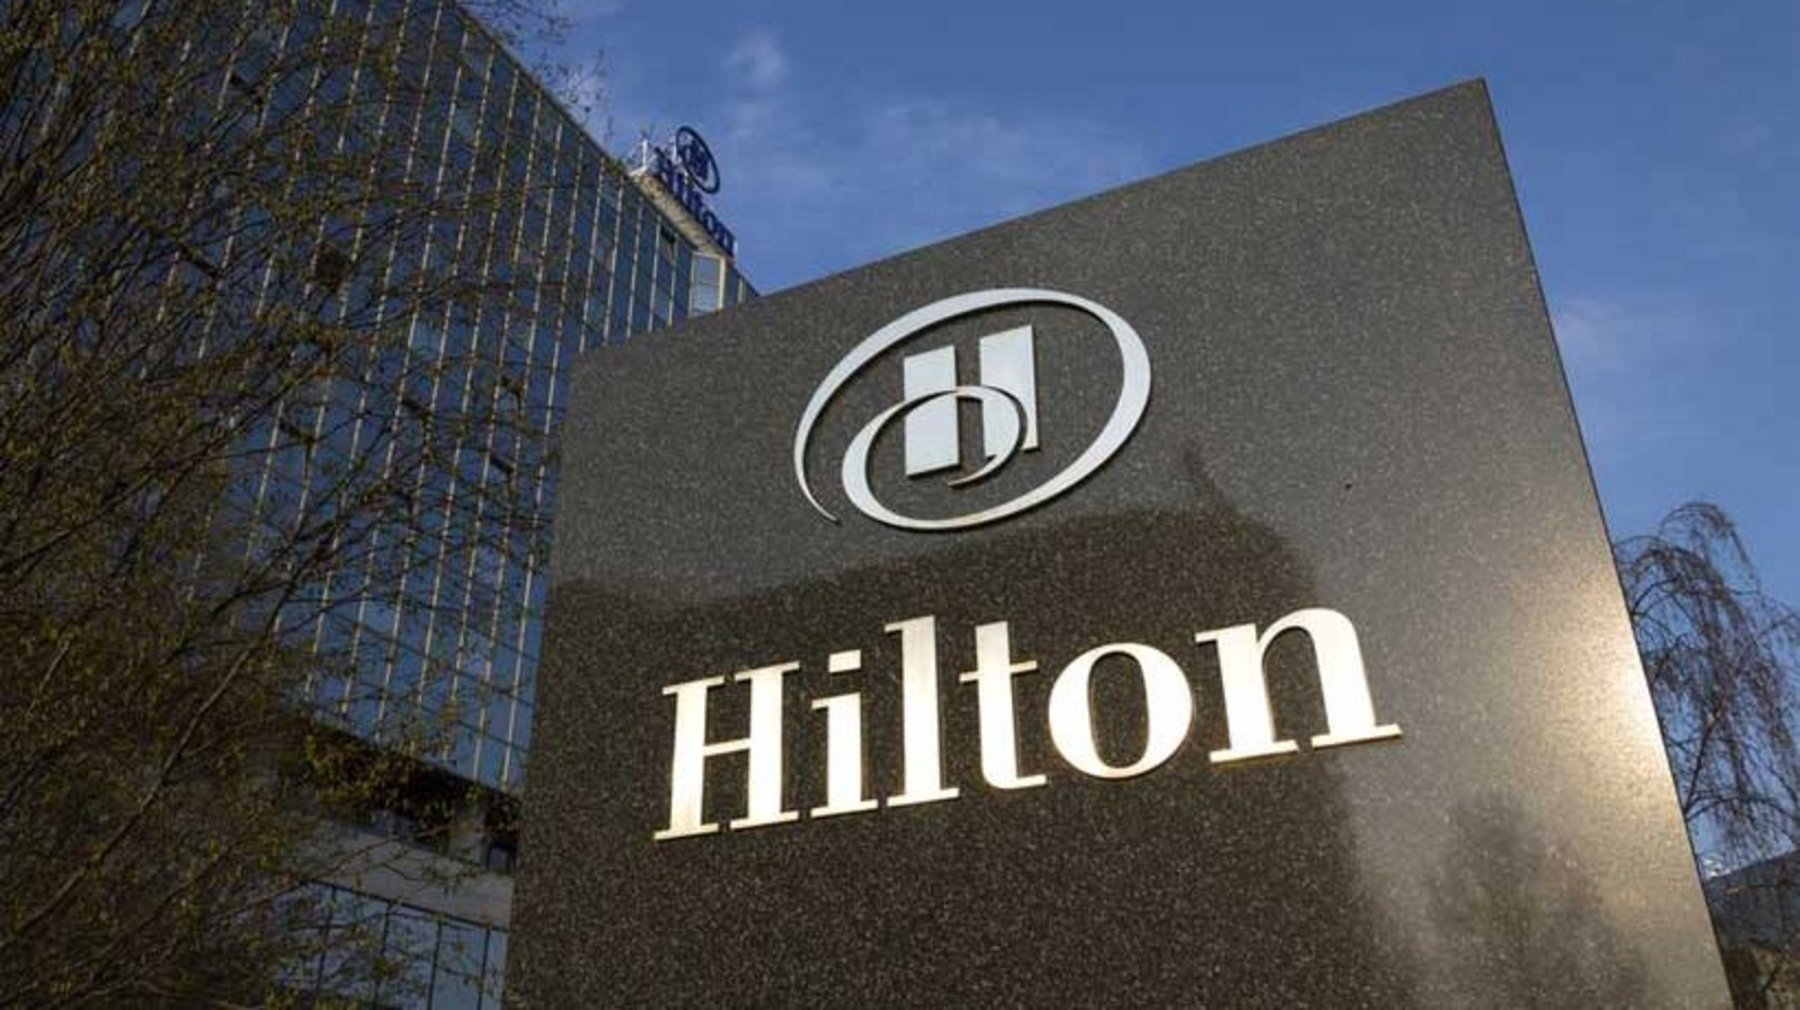 Hilton most valuable hotel brand, RitzCarlton growing fast Business